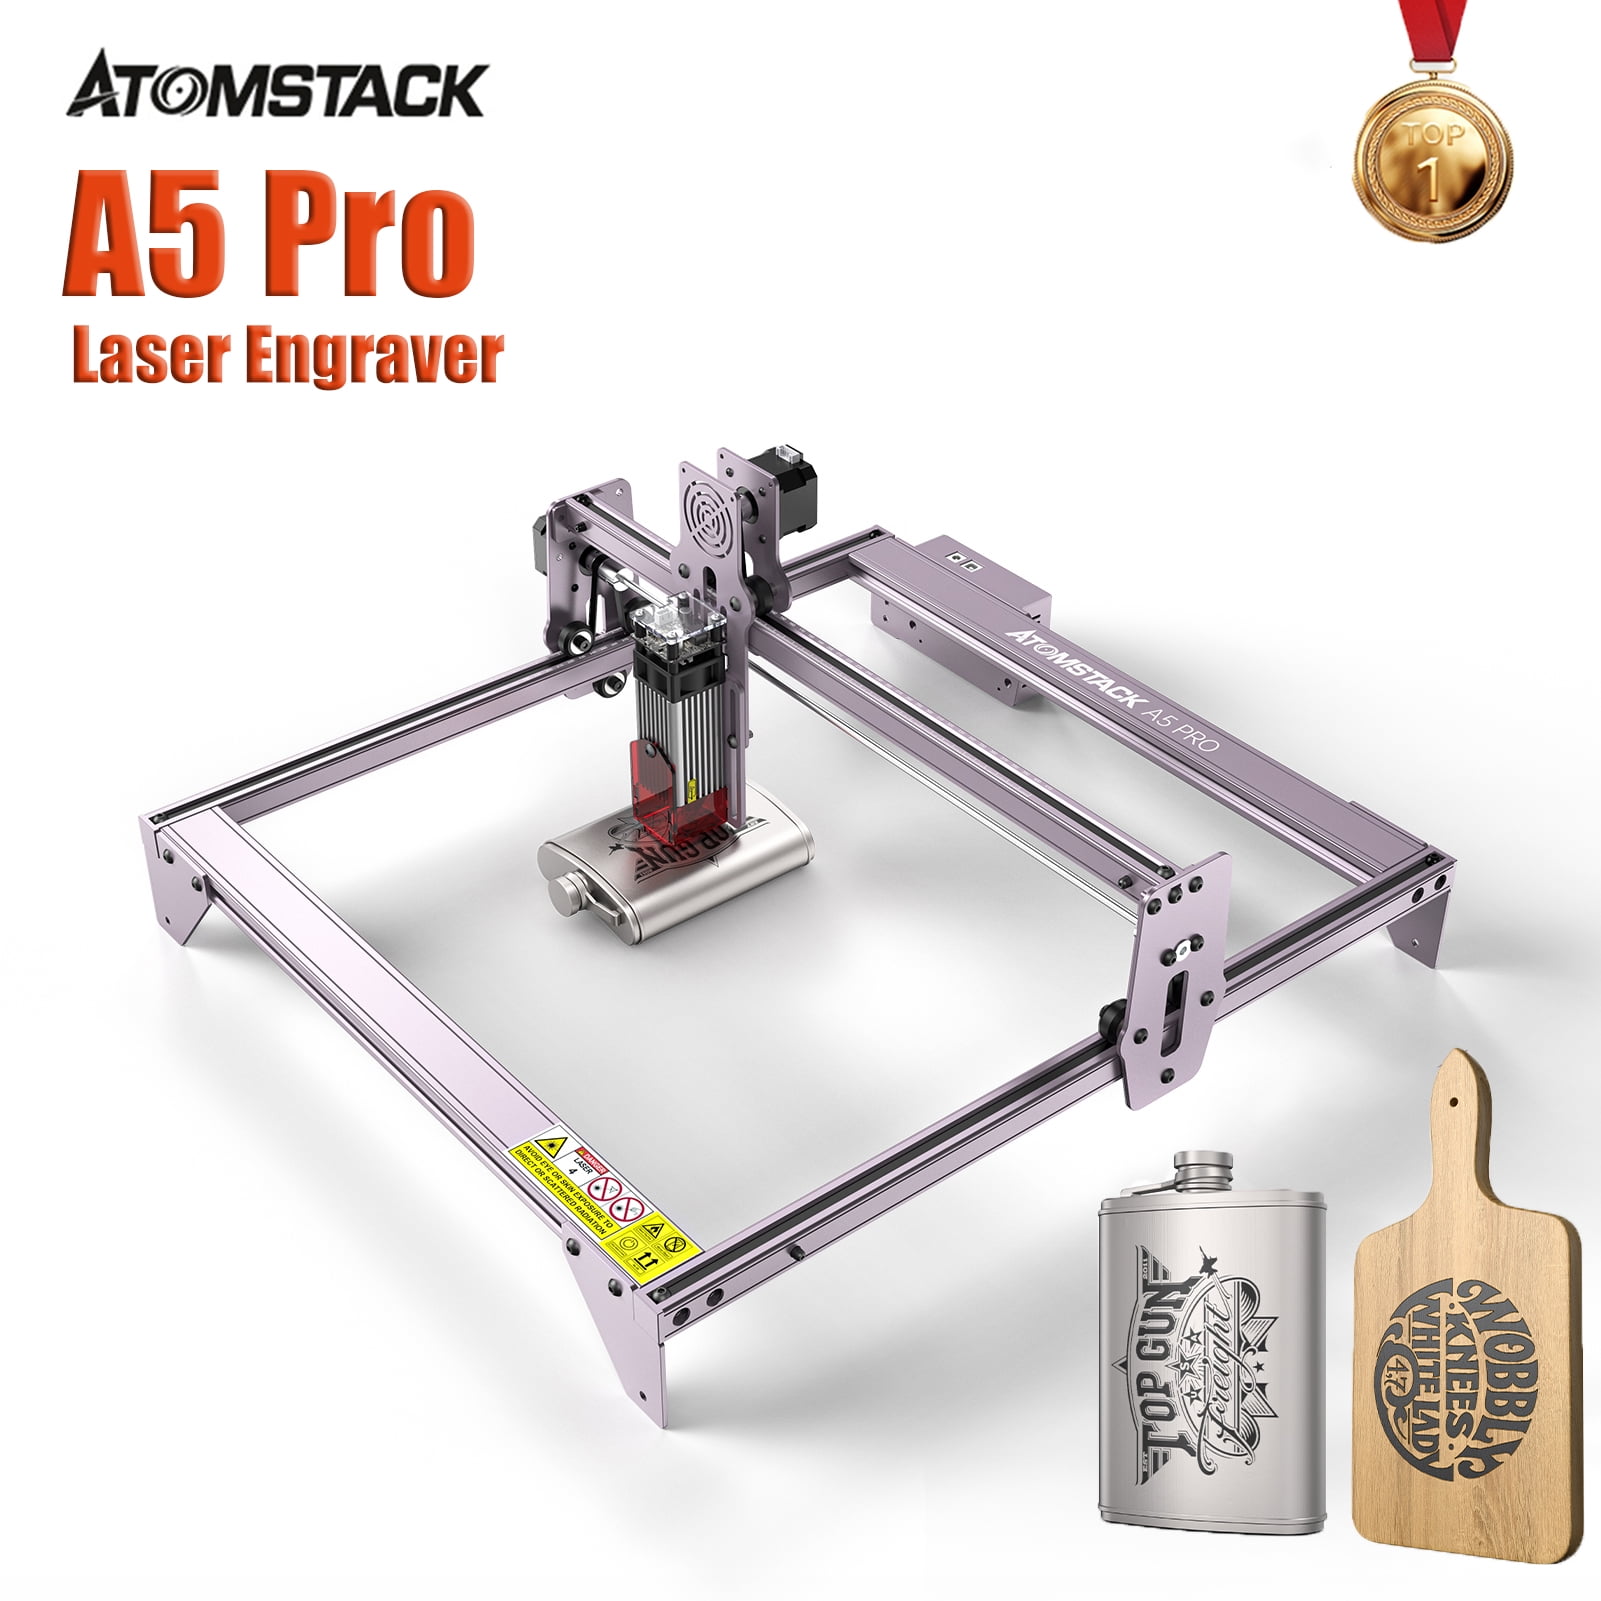 Official ATOMSTACK A5 PRO+ 40W Laser Engraver Cutting & Engraving